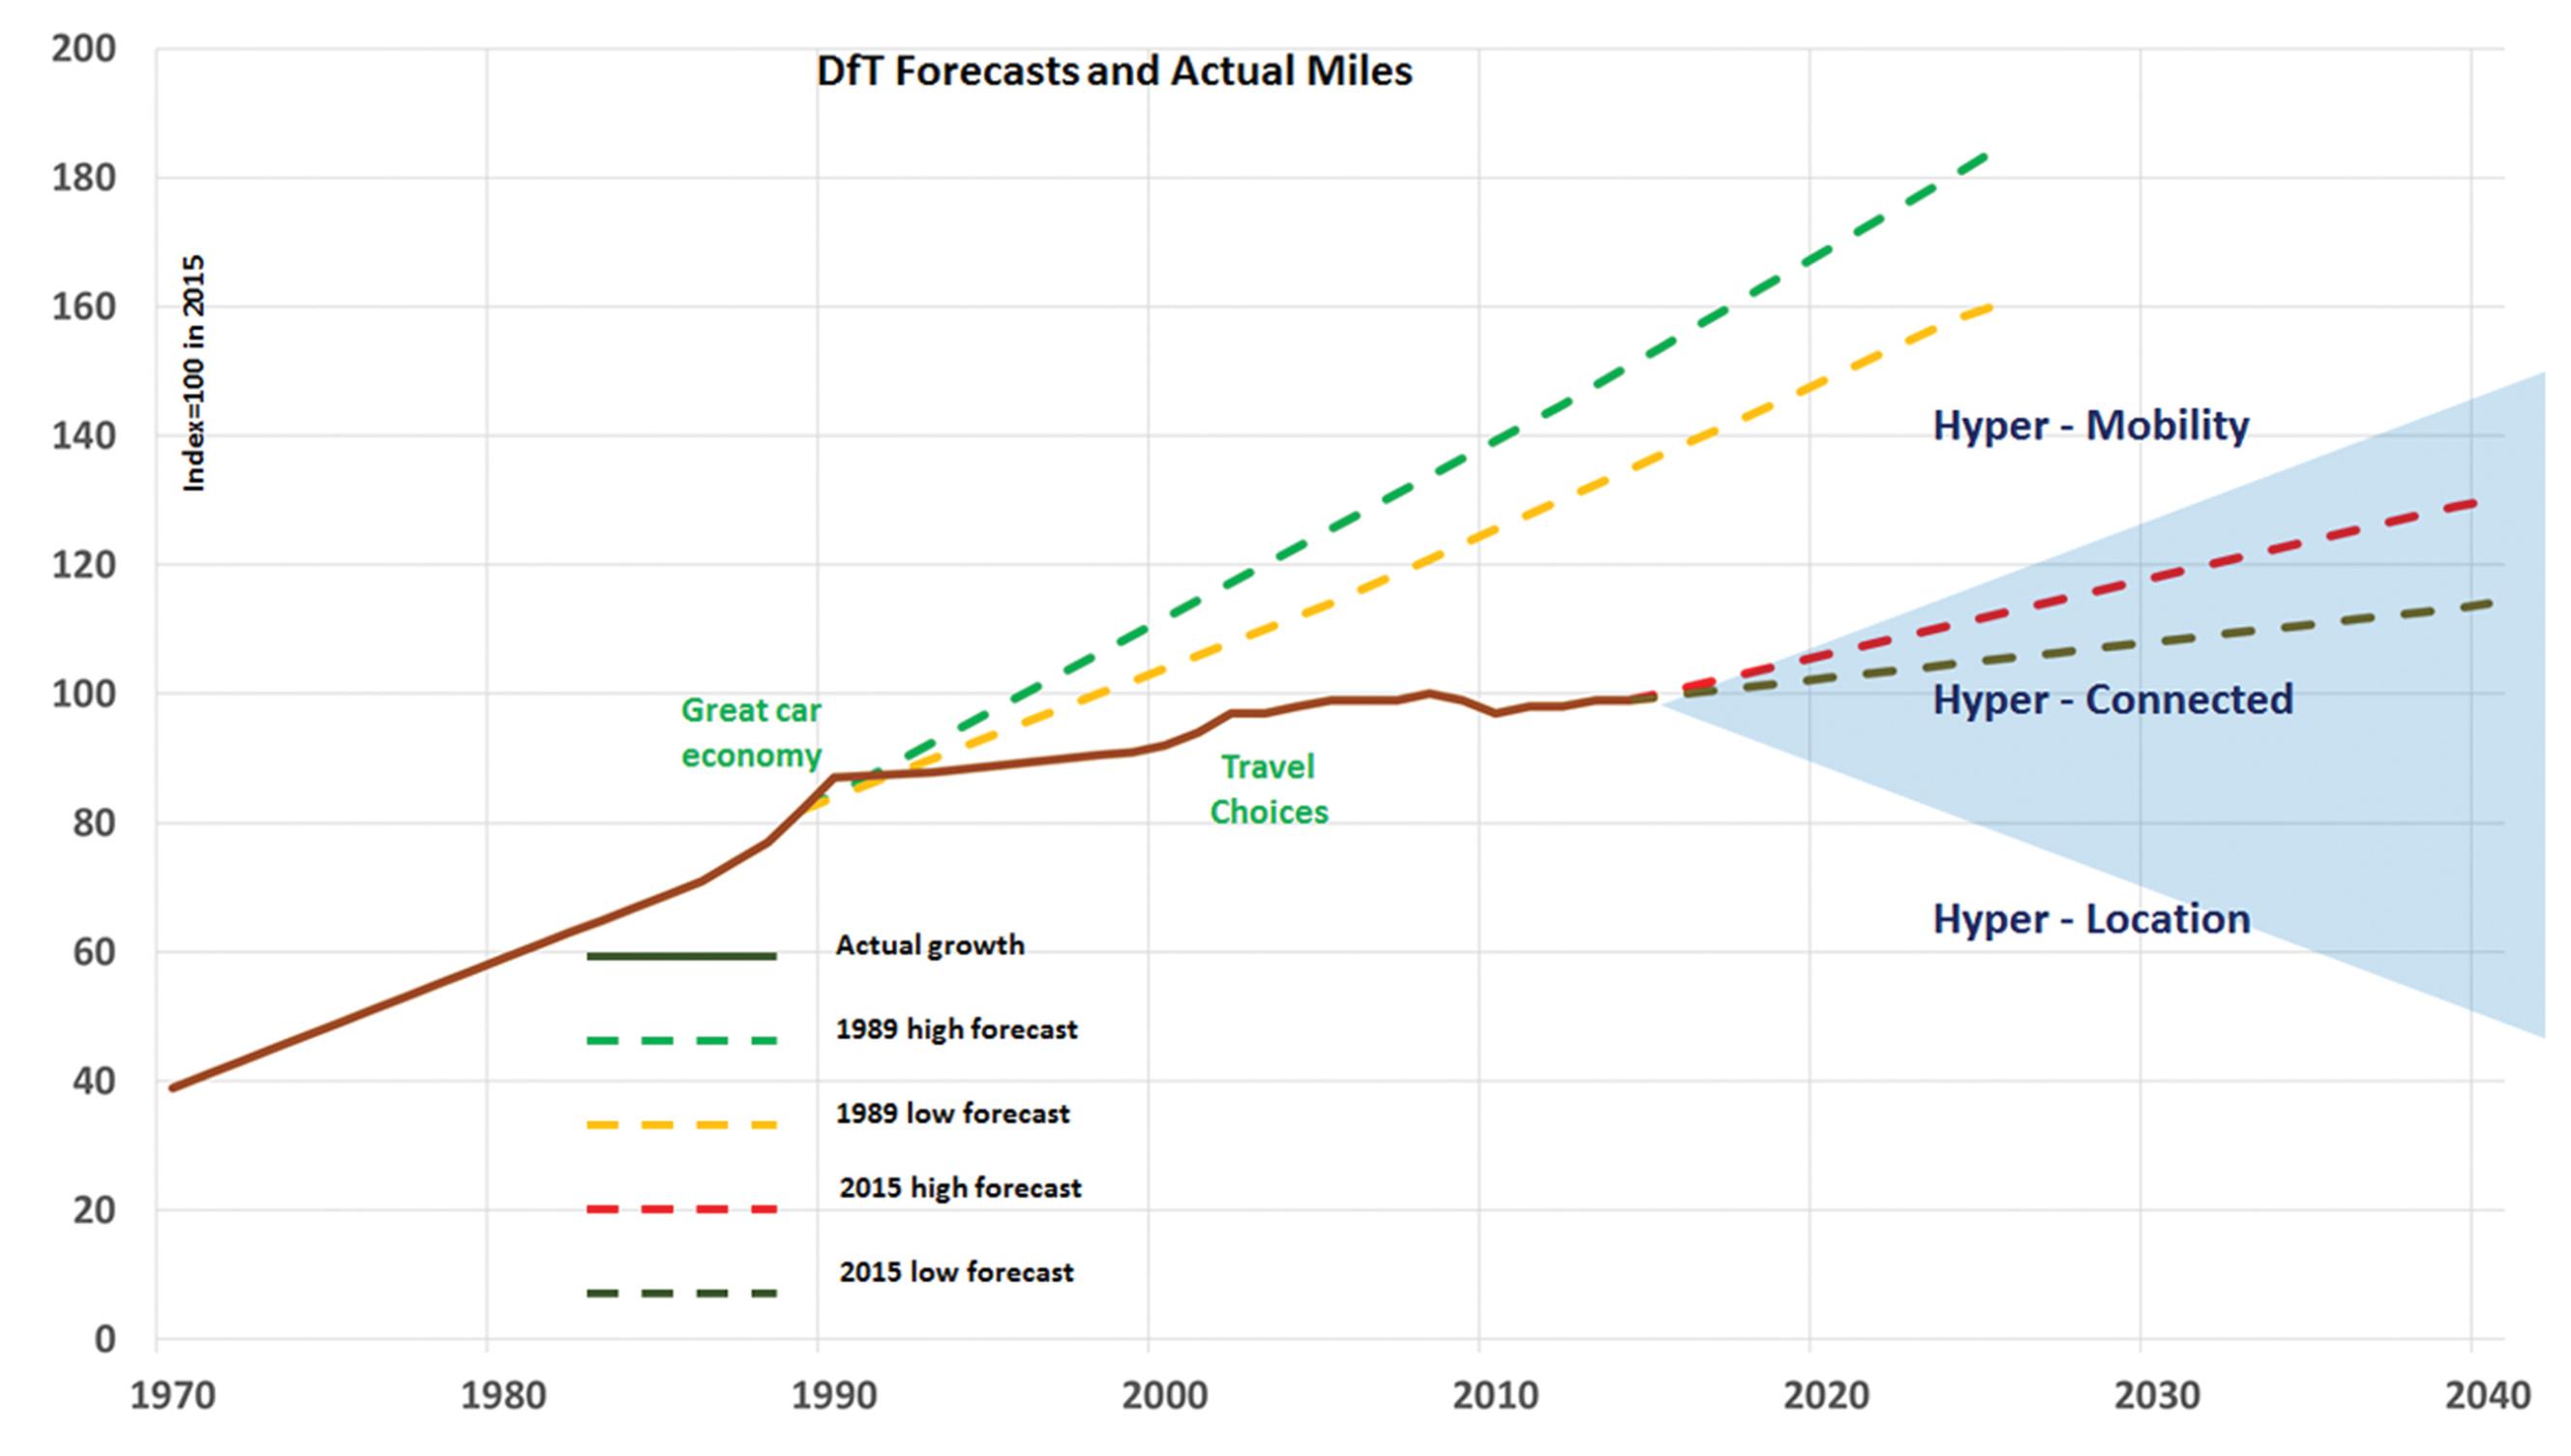 Derek Halden’s graph linked different types of mobility to historic UK traffic growth forecasts